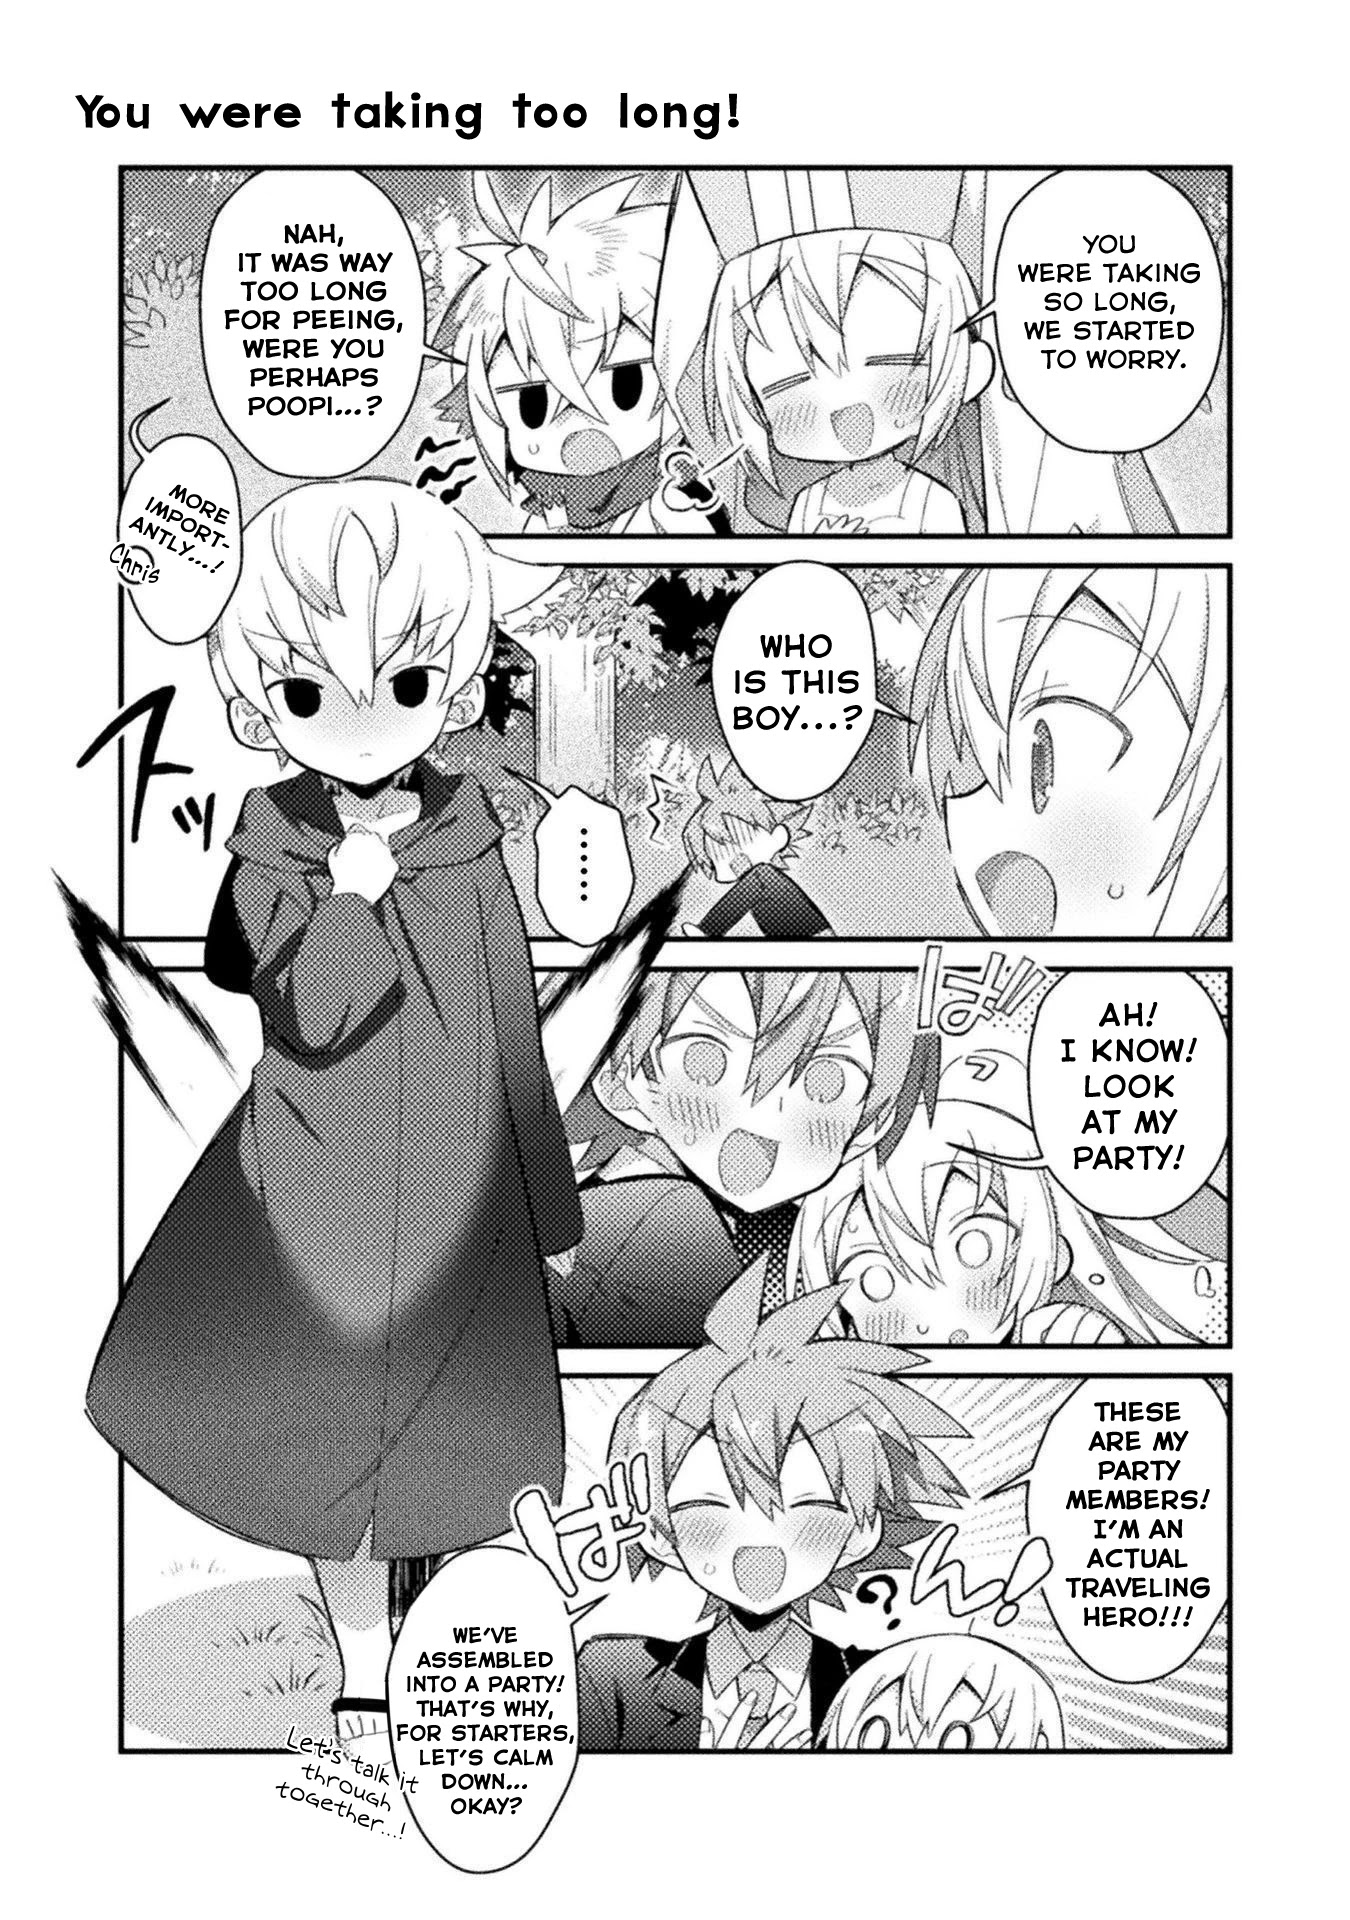 After Reincarnation, My Party Was Full Of Traps, But I'm Not A Shotacon! - Page 2